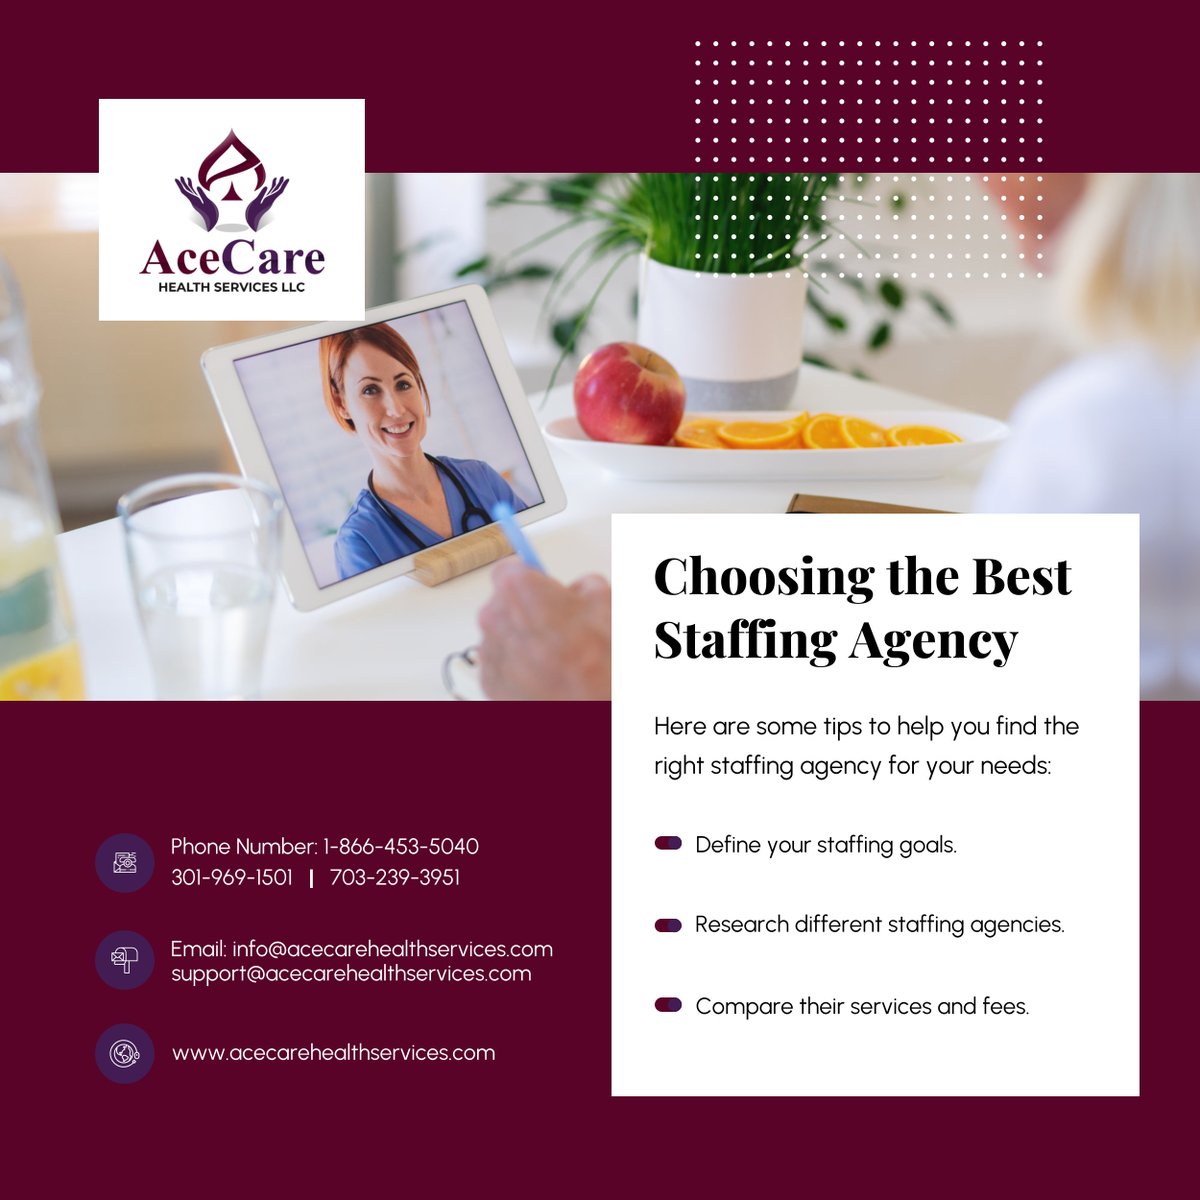 When choosing the best staffing agency for your business, you have to consider various factors, such as its reputation, fees, and services. This will help ensure a smooth and successful staffing process.

#ChevyChaseMD #BestStaffingAgency #HomeHealthCare